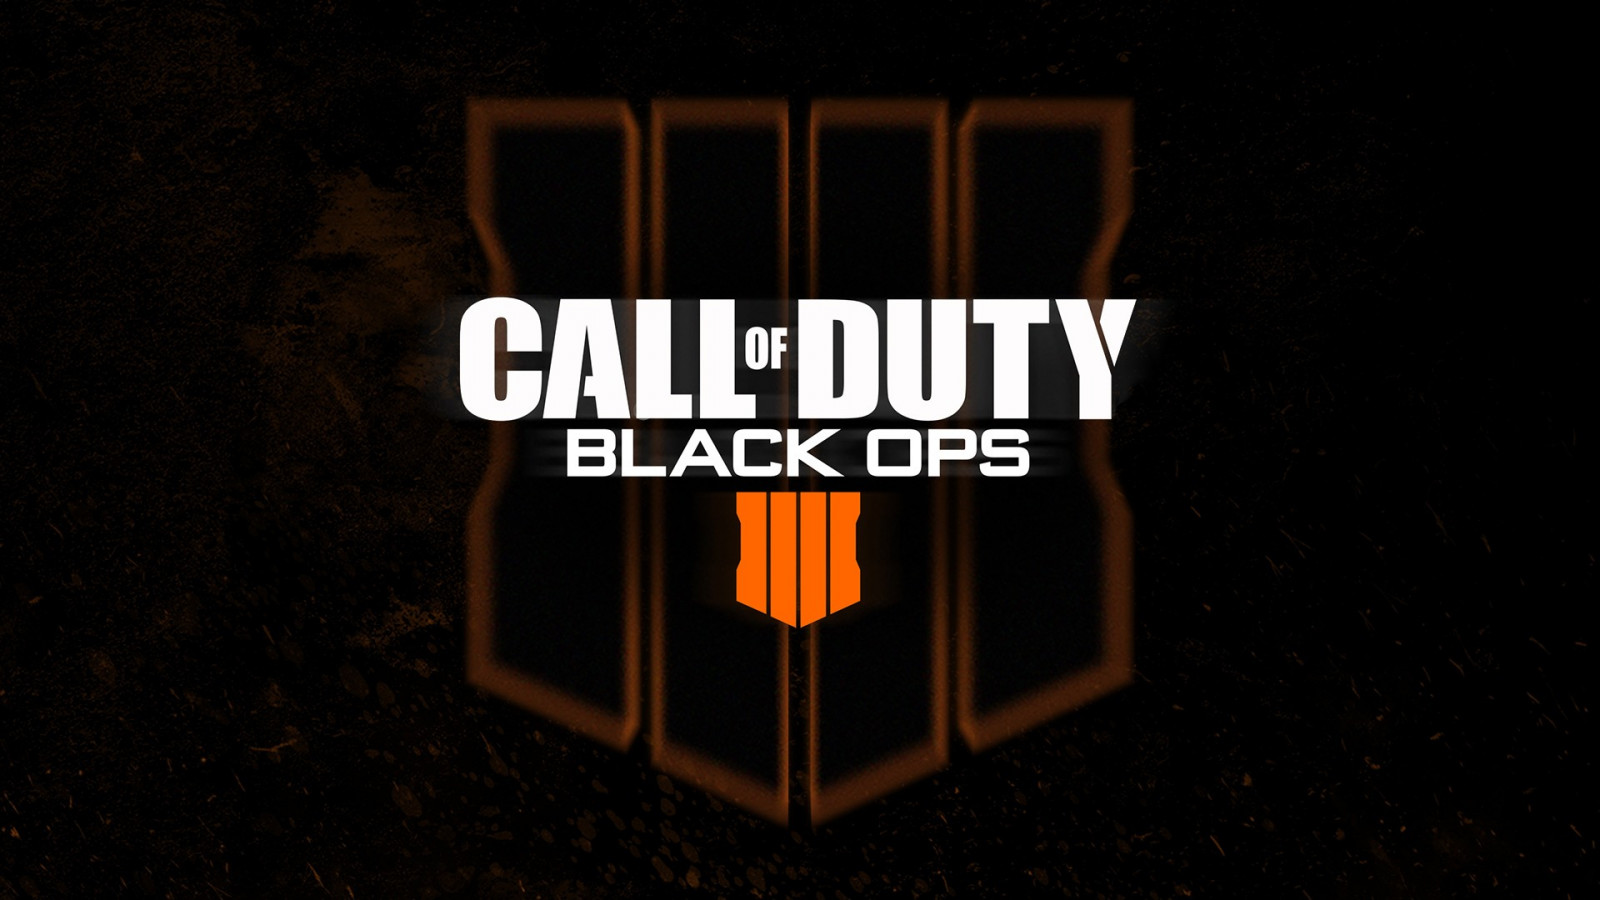 Call of Duty Black Ops 4 reveal wallpaper 1600x900